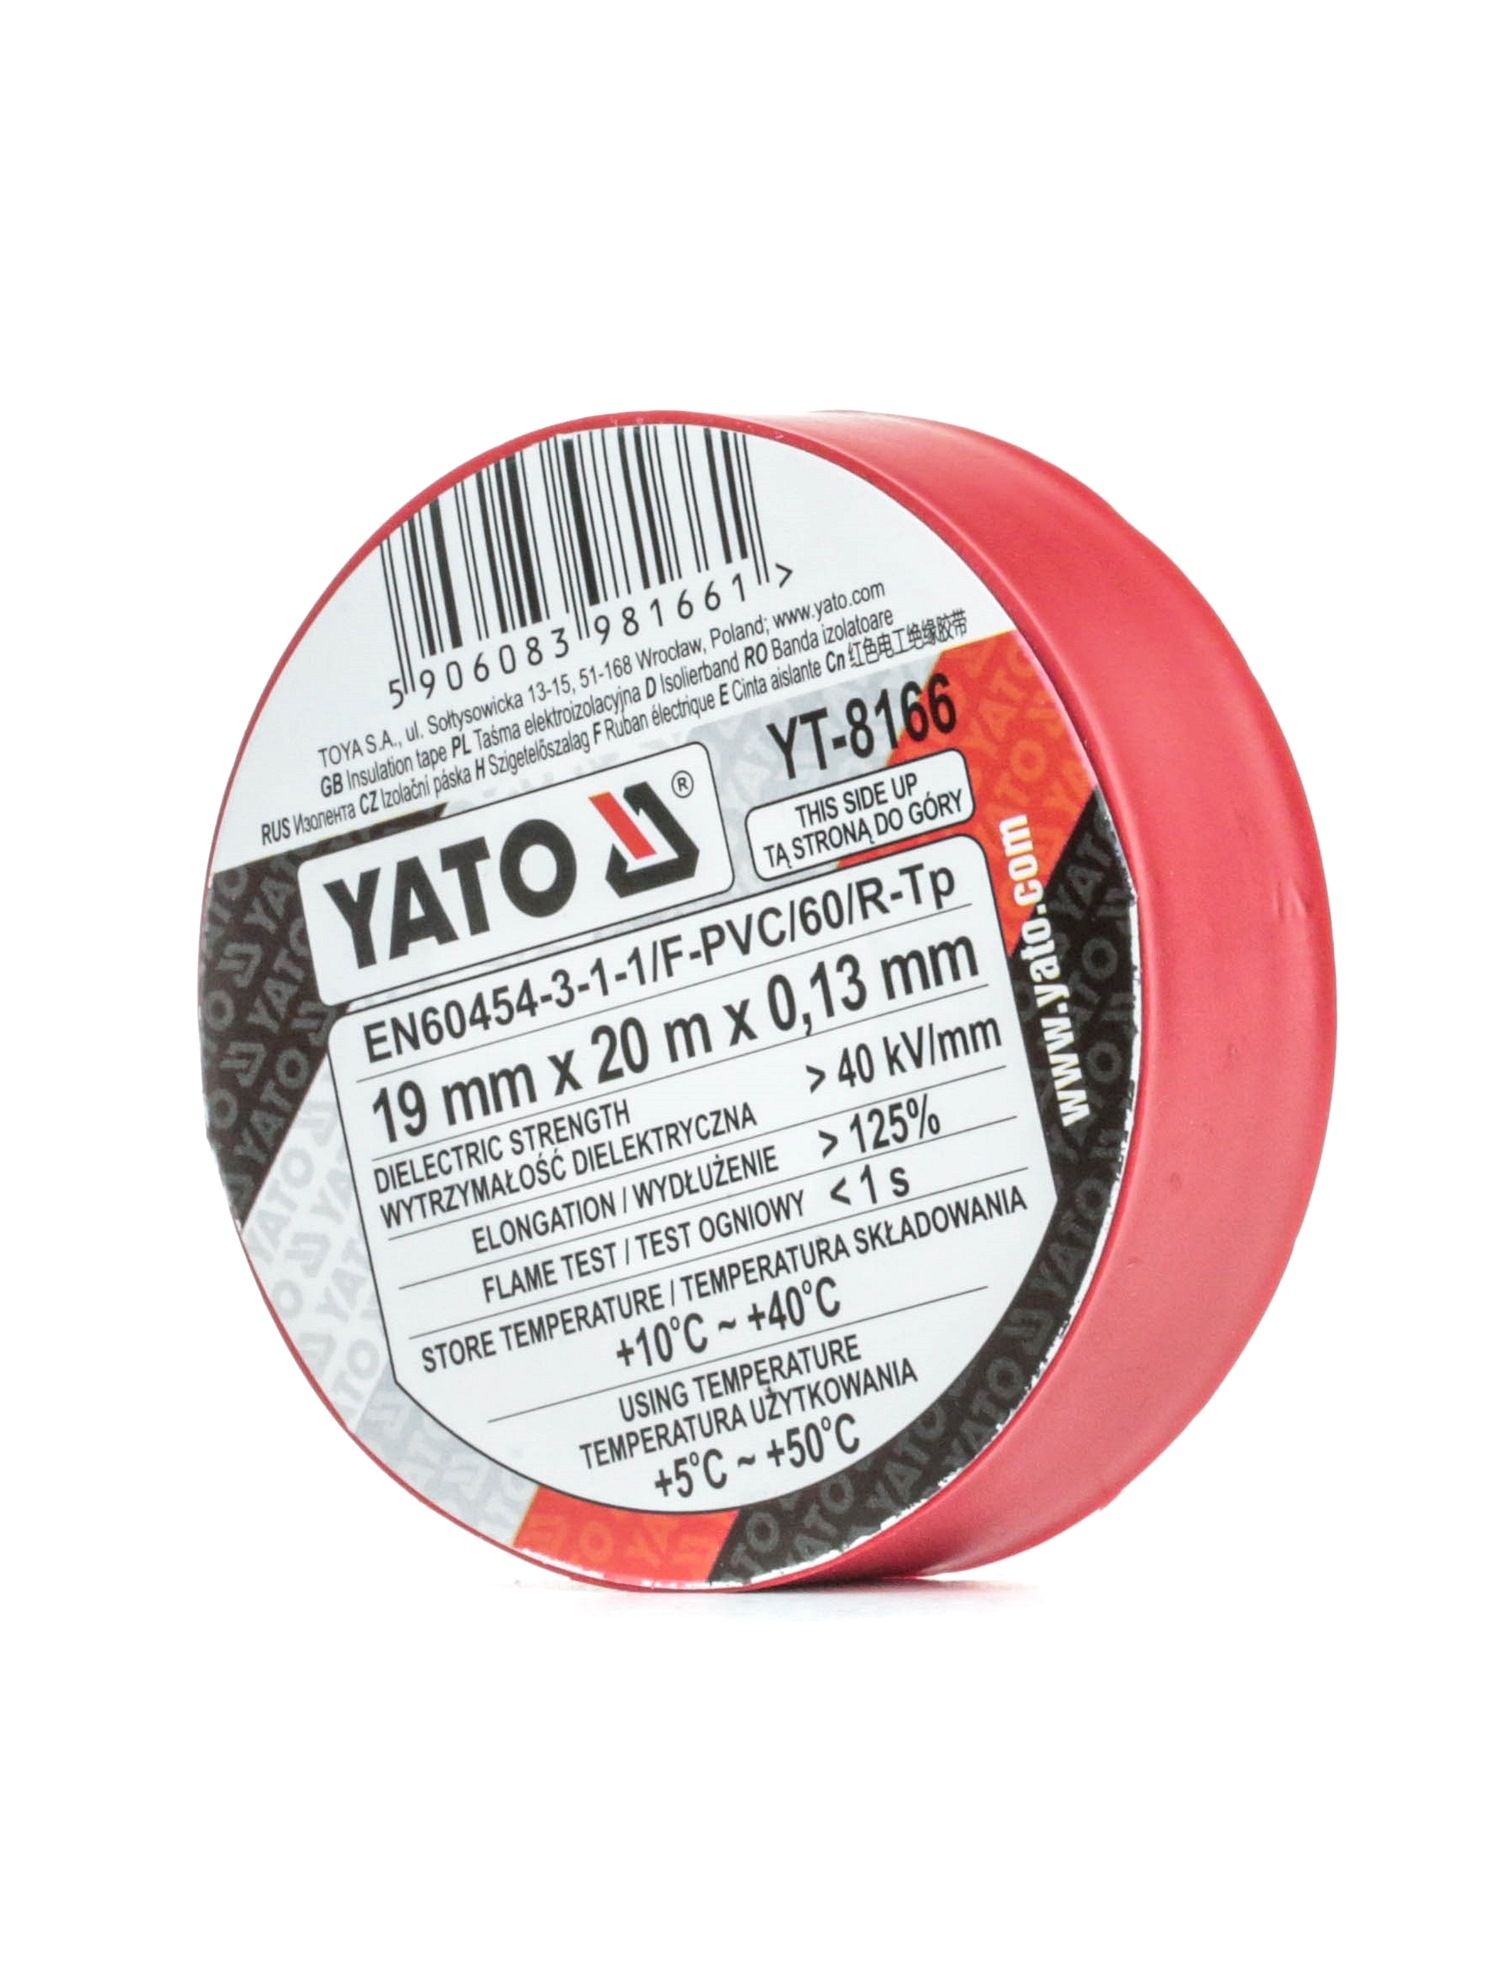 YATO 19mm, red, PVC, Fabric film, 20m, One-sided Adhesive Tape YT-8166 buy